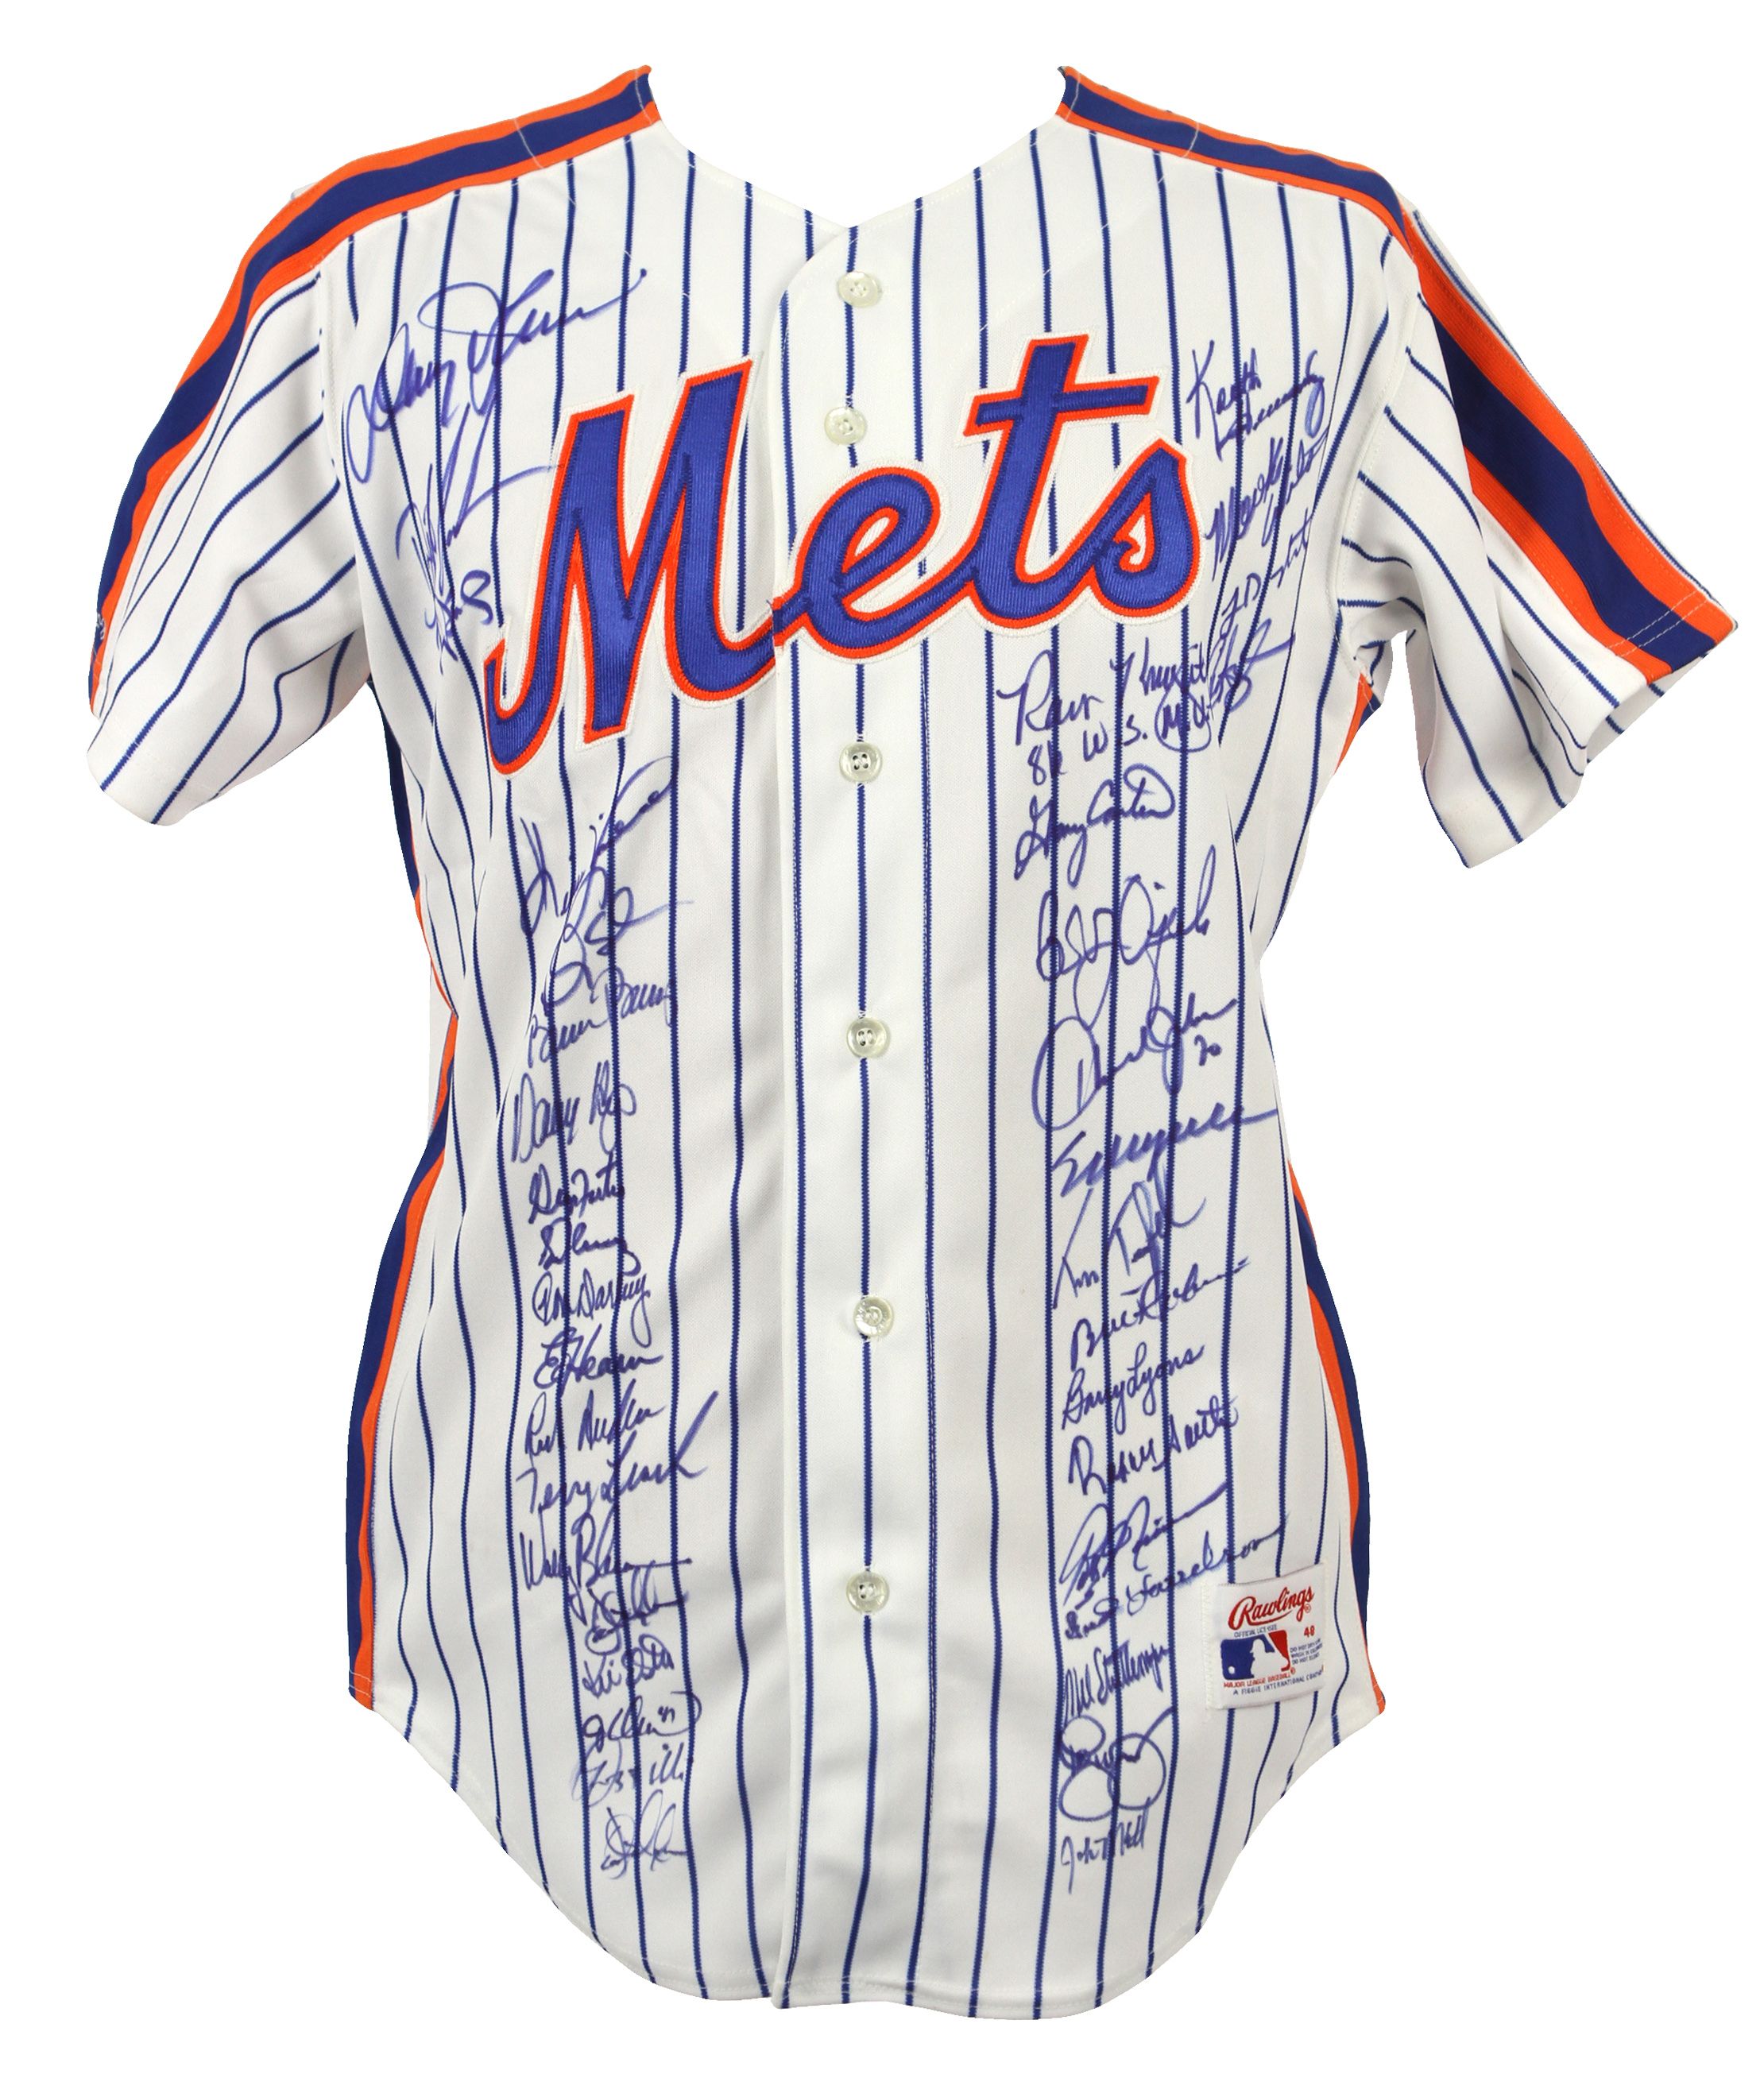 where to buy new york mets jersey